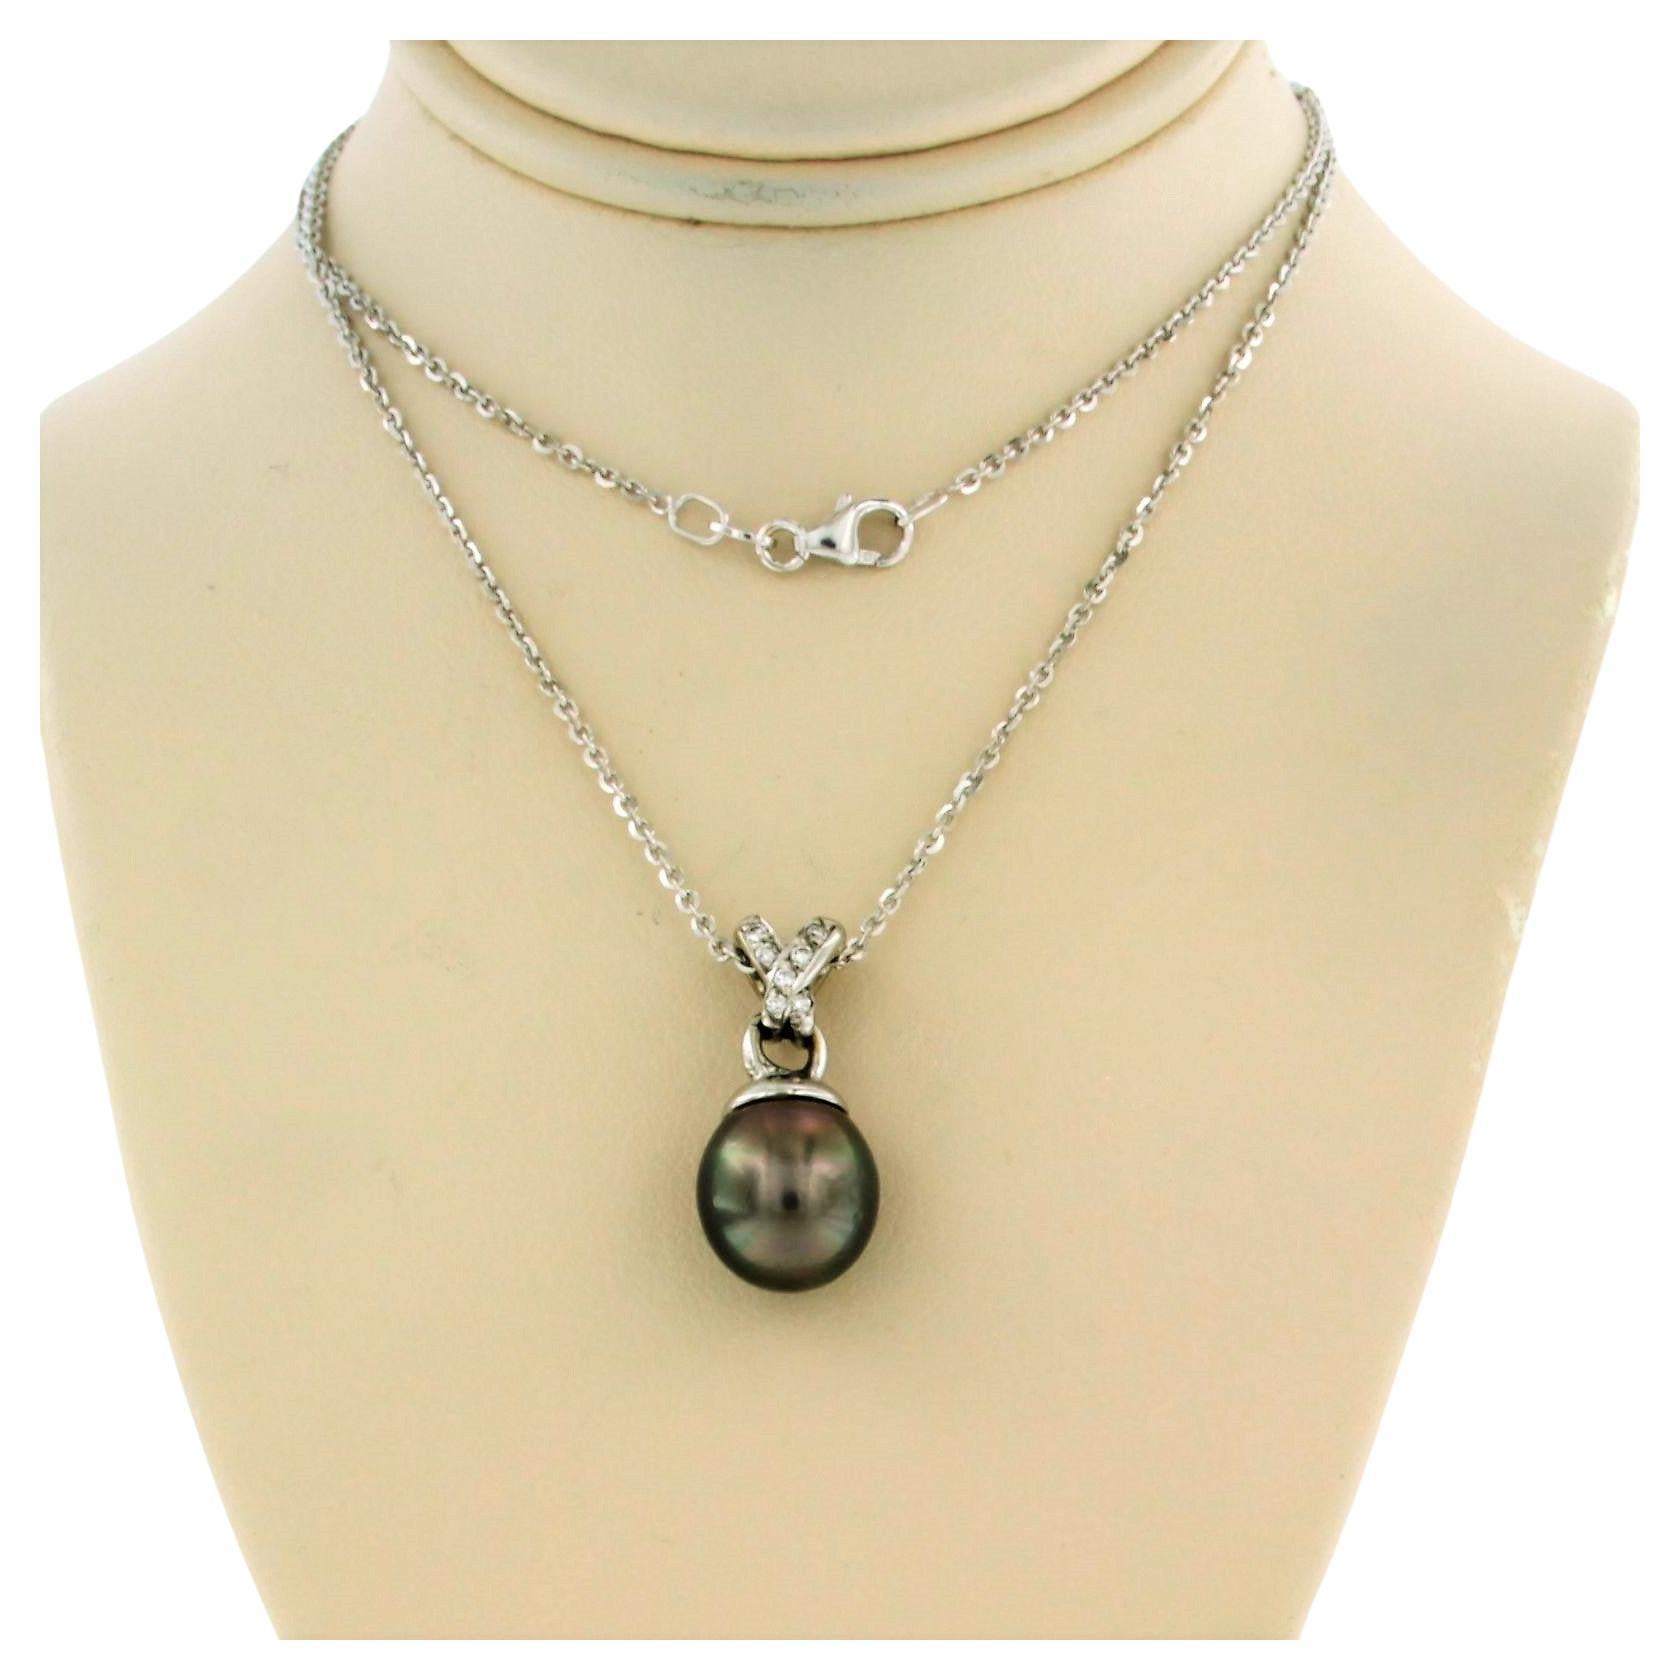 Necklace and pendant set wuth Tahiti pearl and diamonds 18k white gold